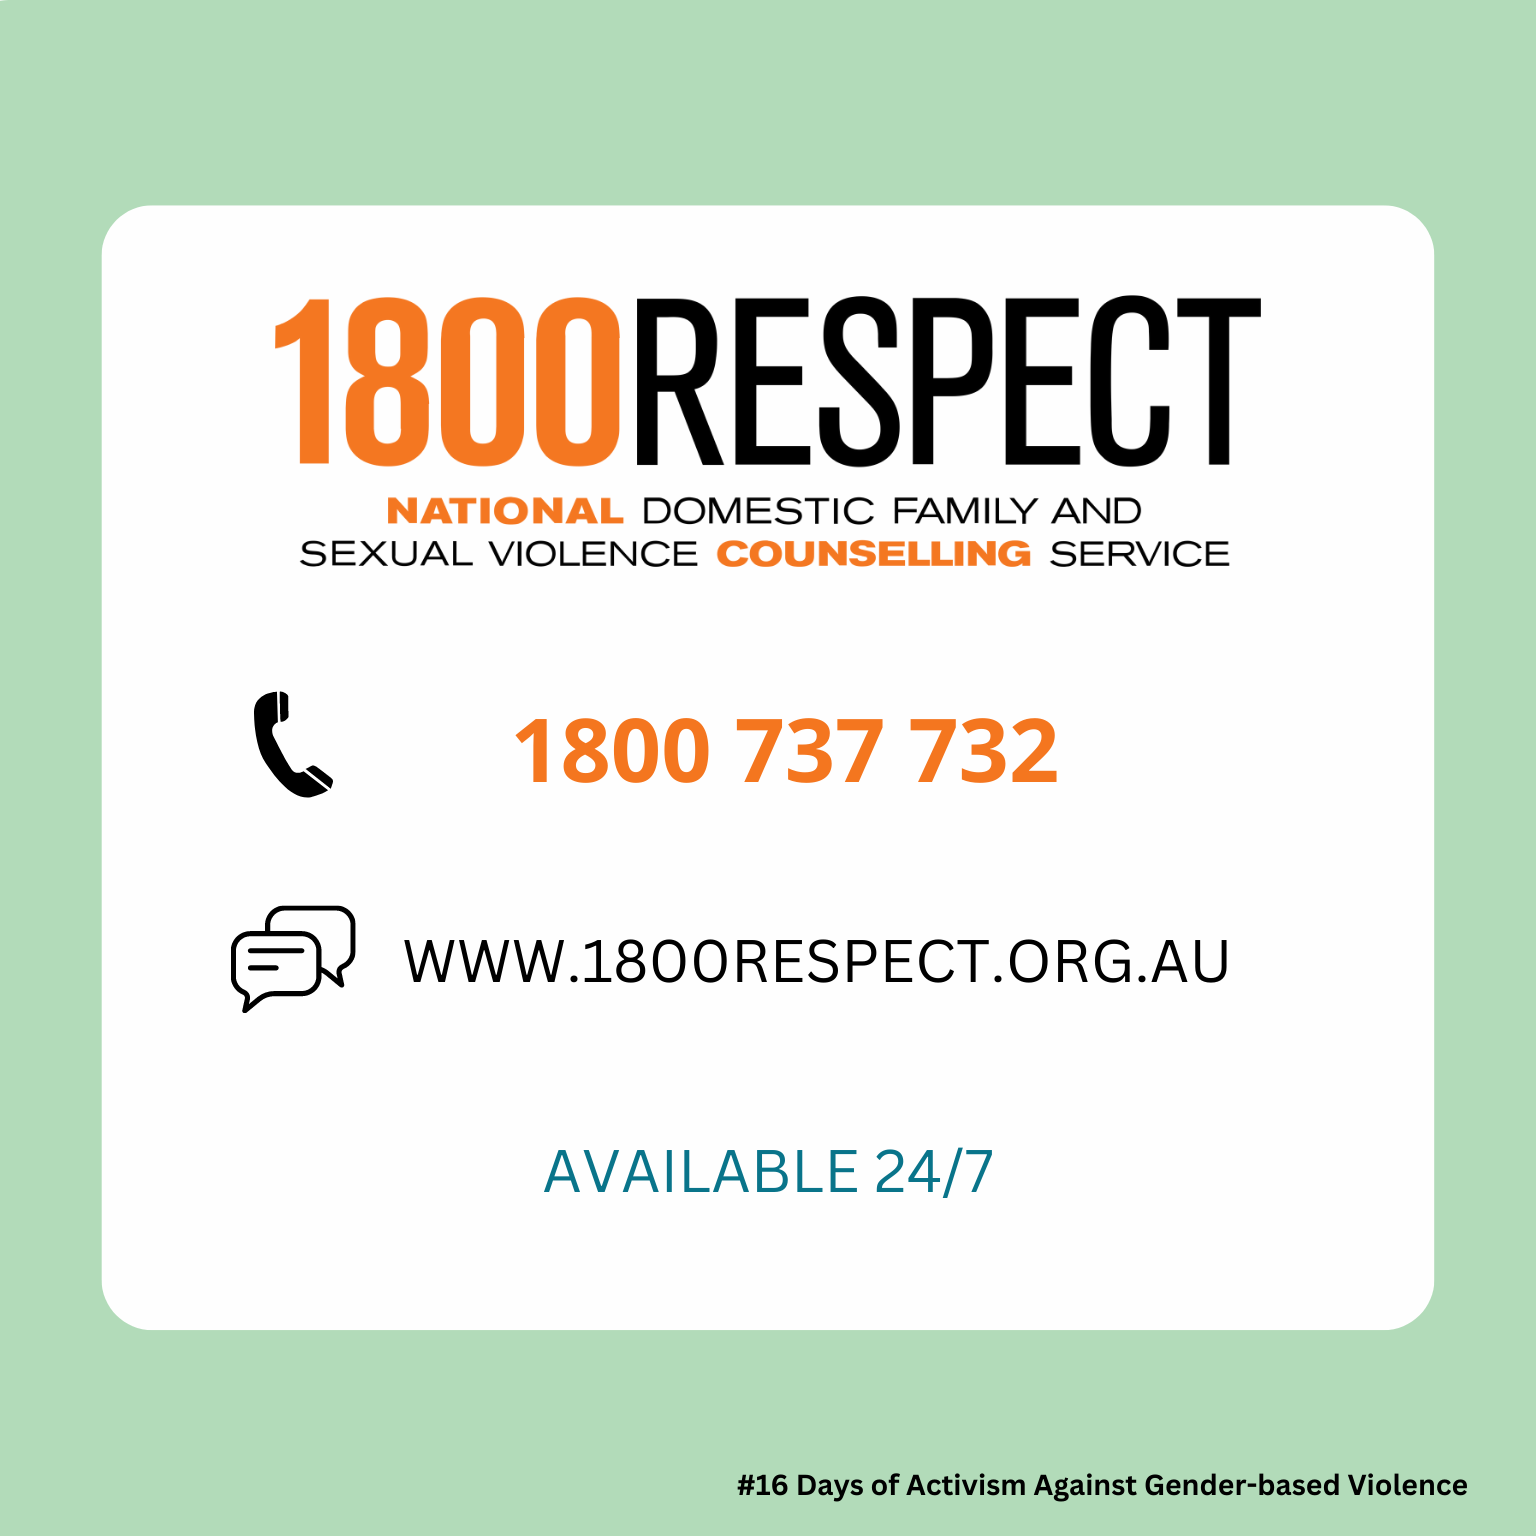 1800RESPECT Contact